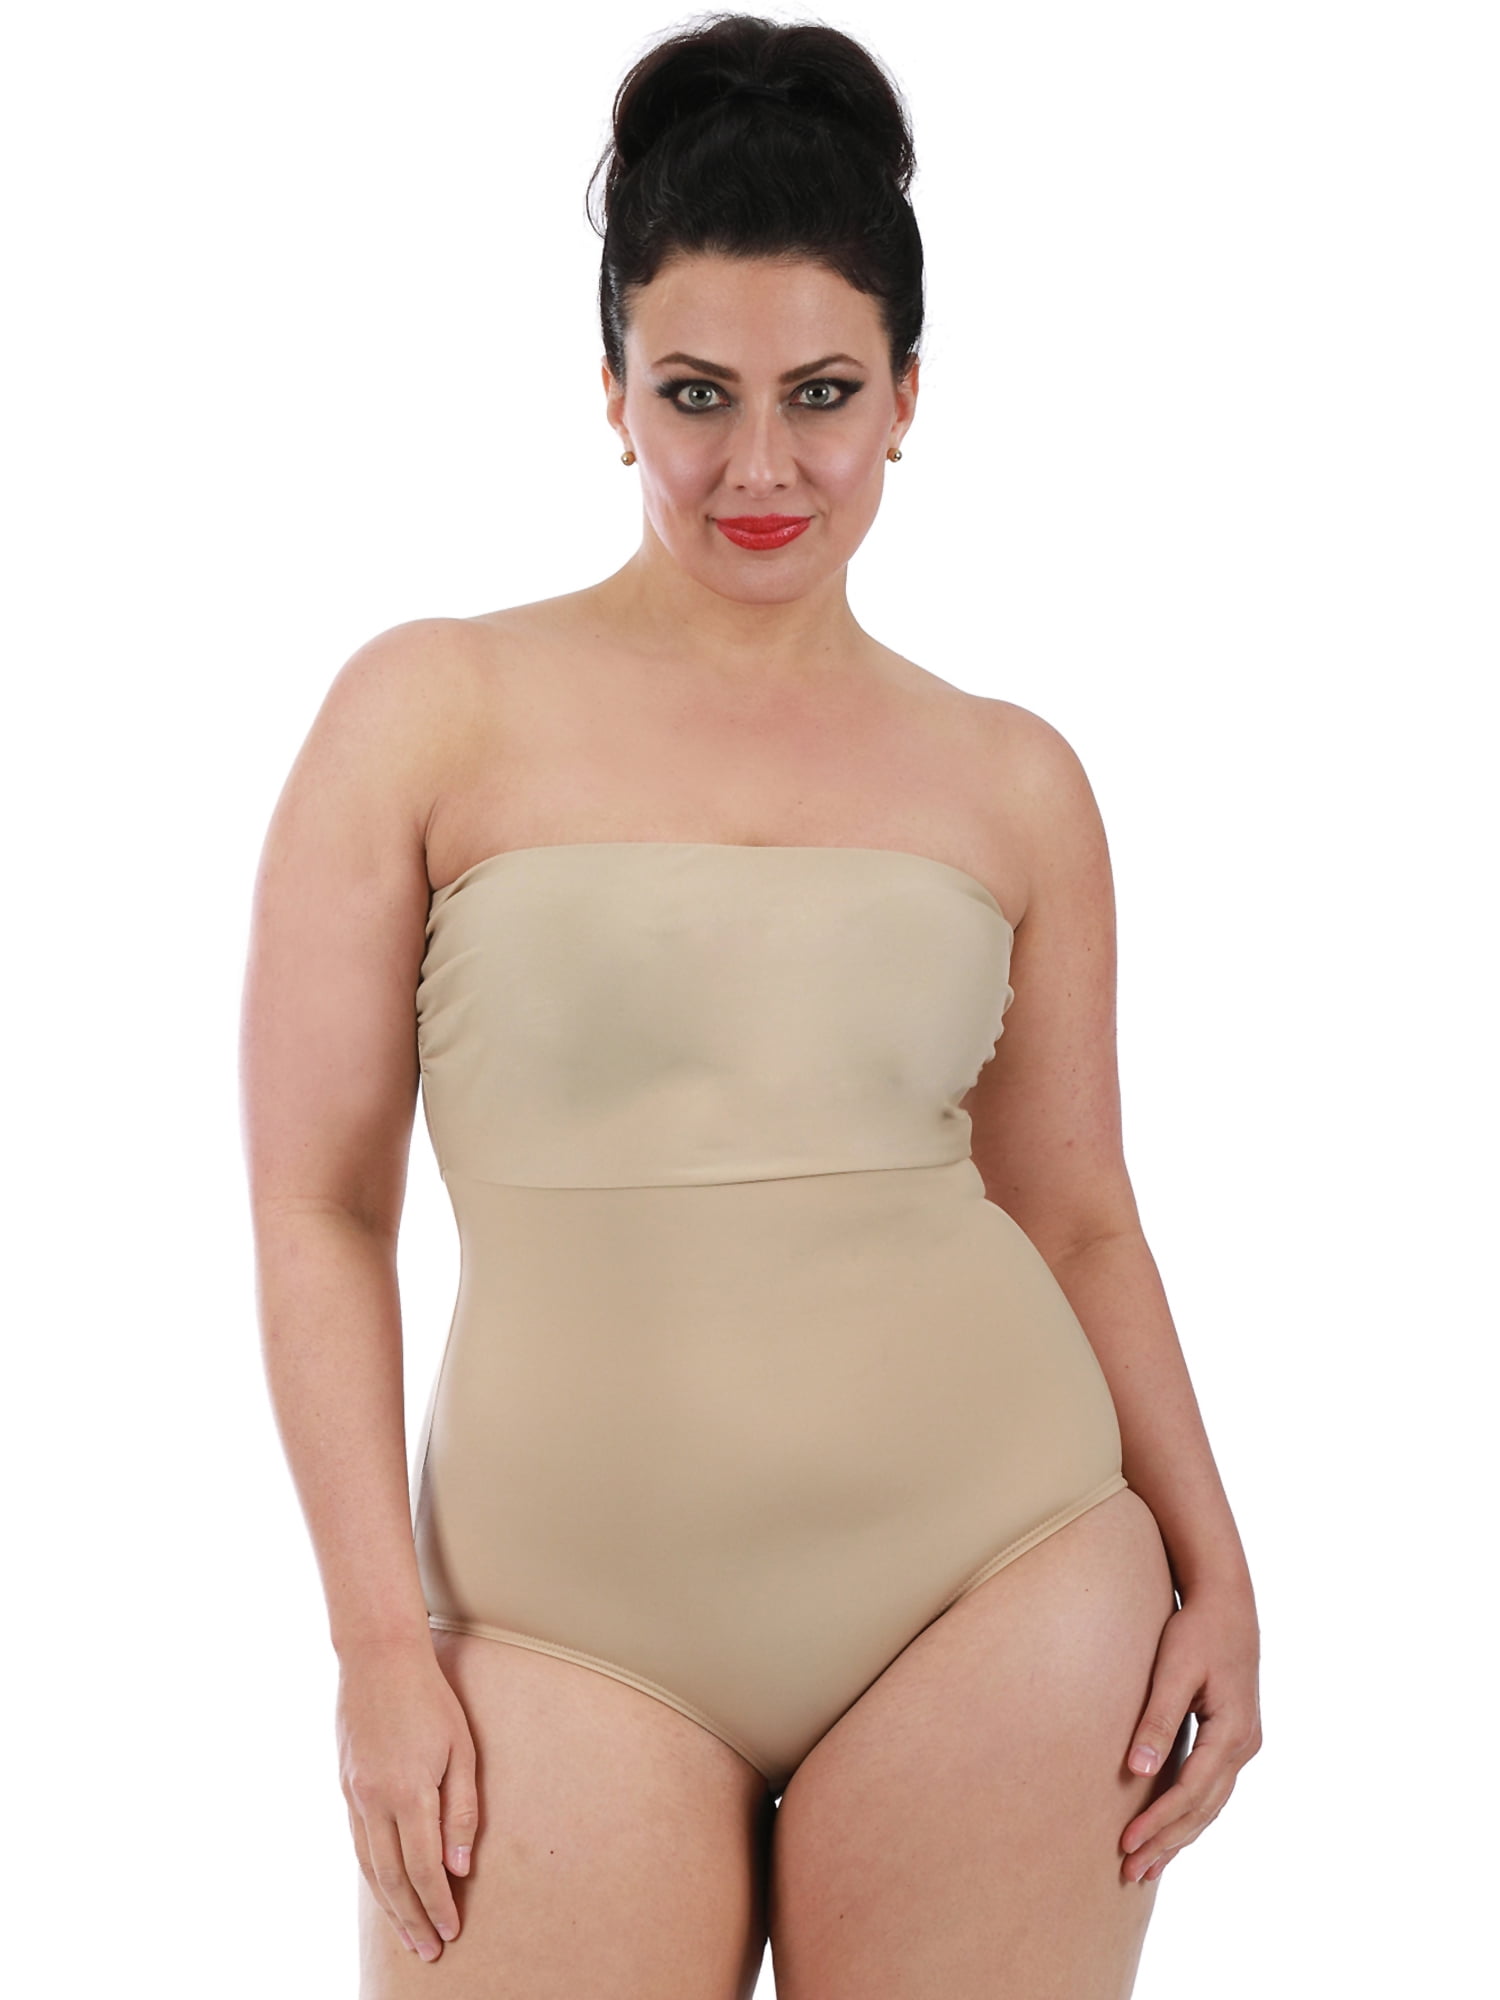 InstantFigure Women's Firm Control Shaping Strapless Bandeau Body